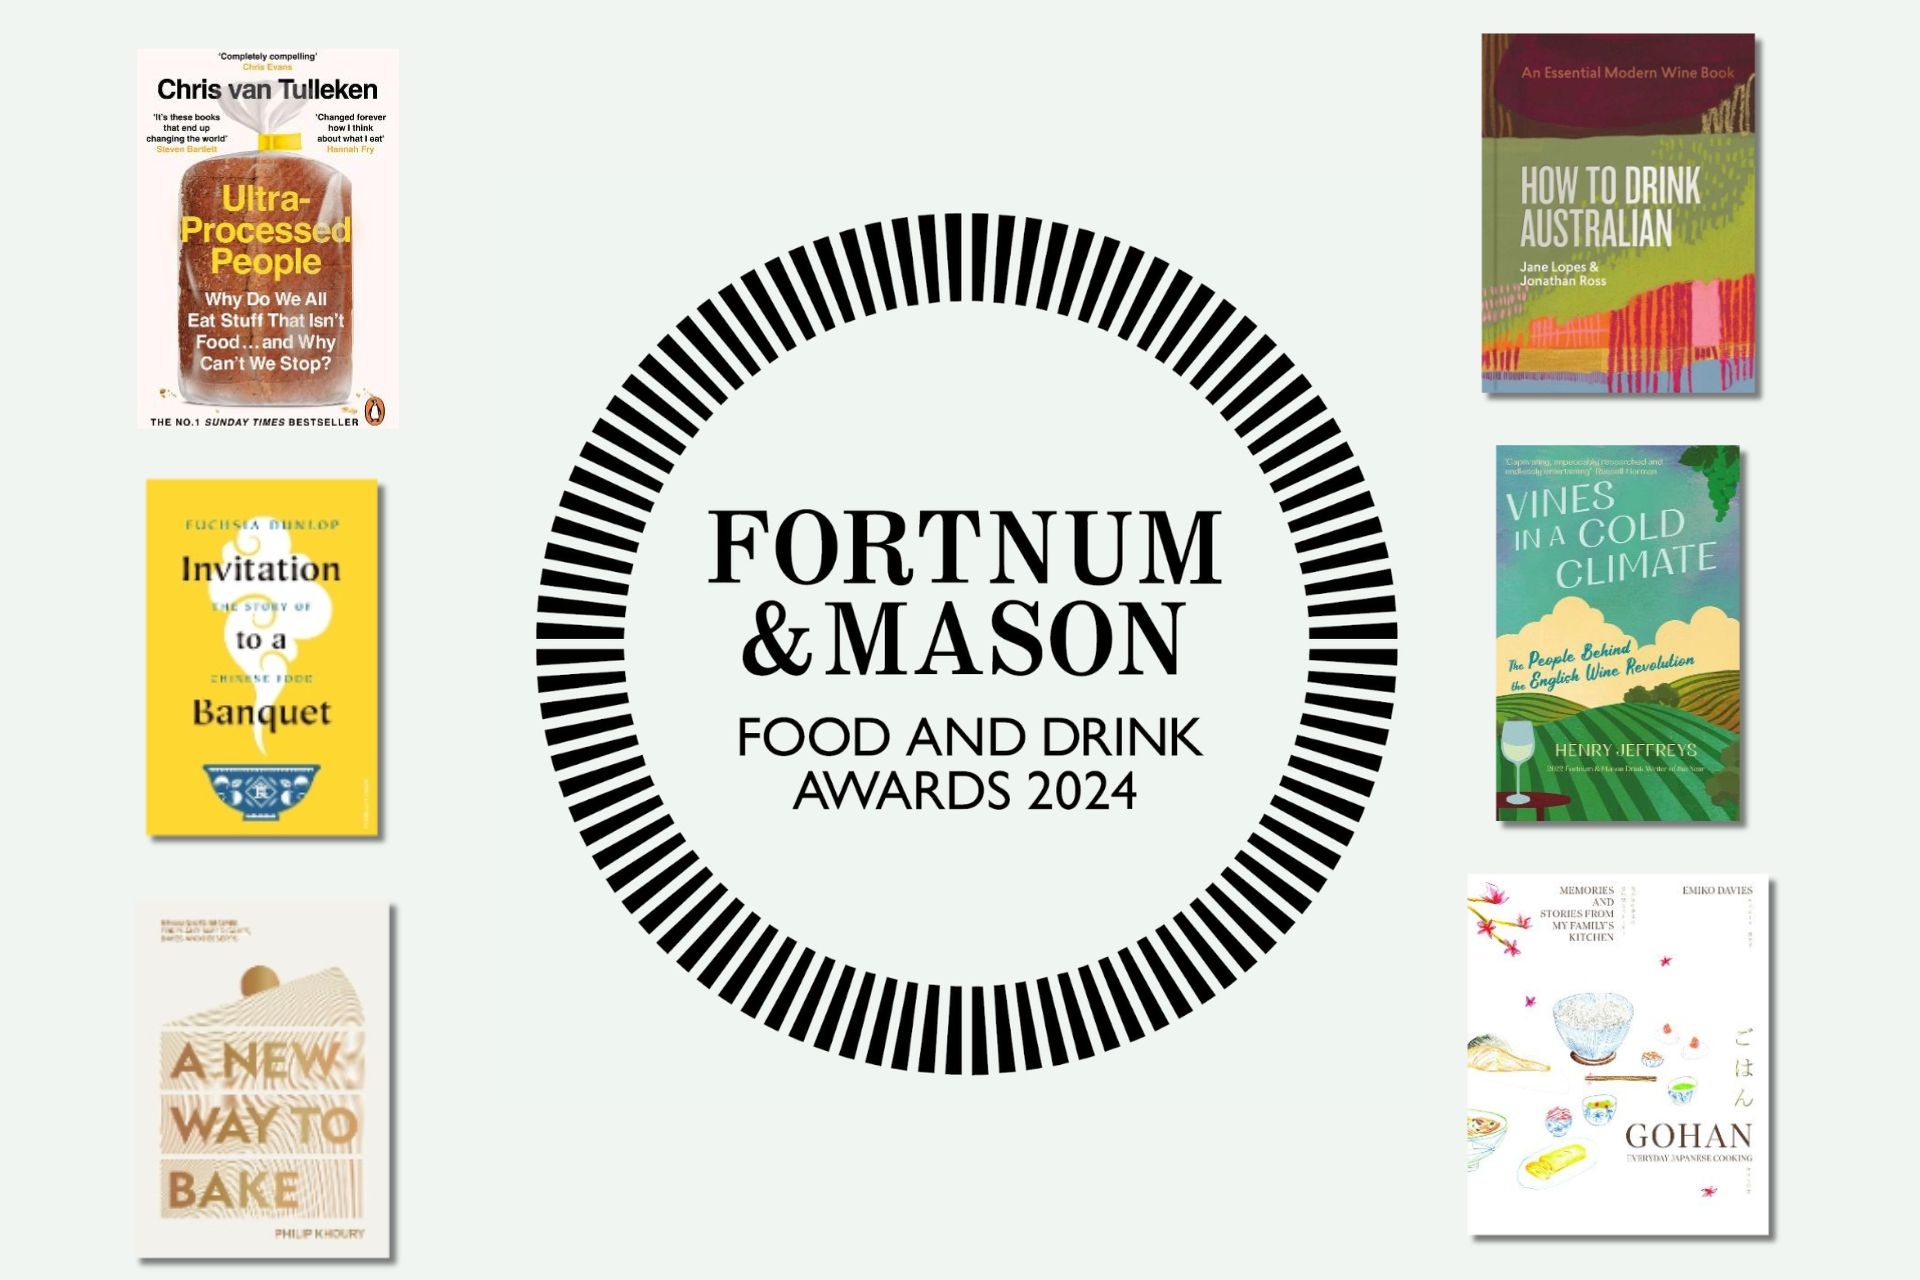 Fortnum & Mason Food and Drink Awards 2024 - Winners Announced